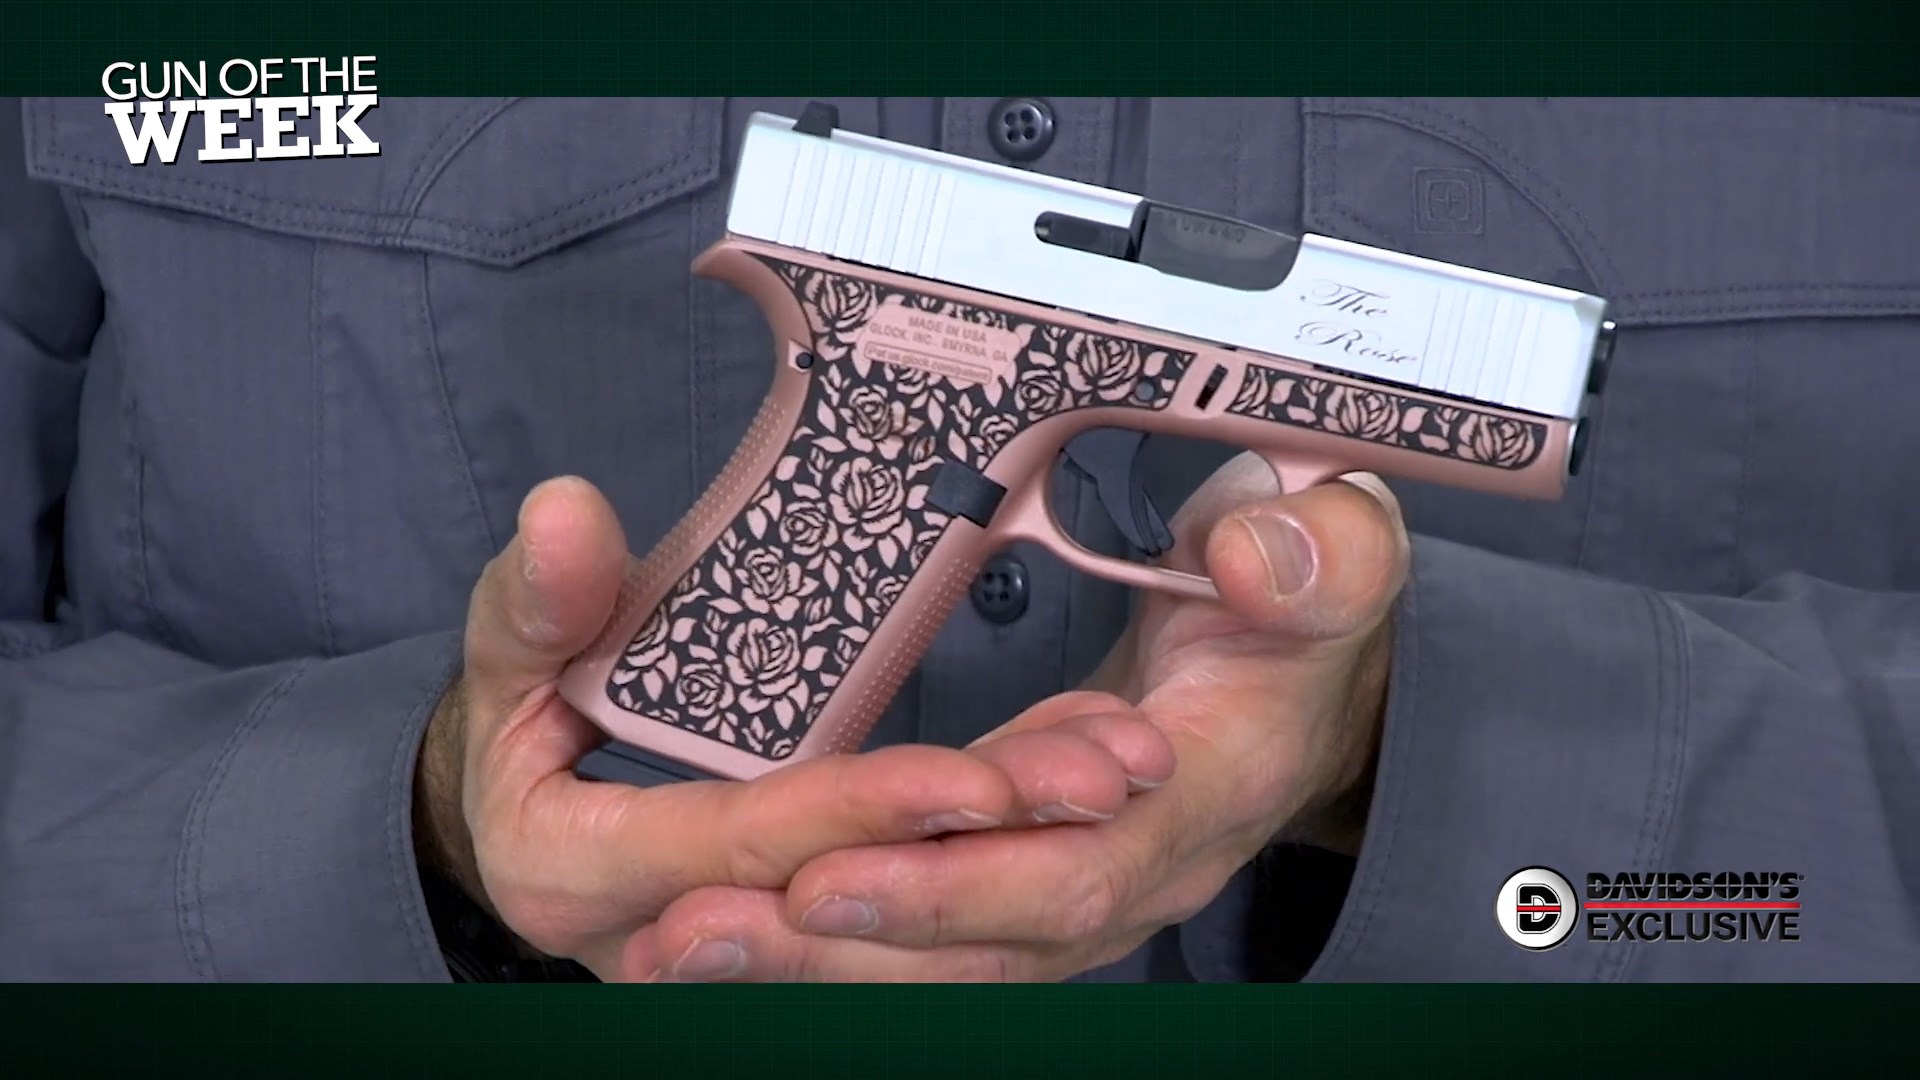 Glock G43X The Rose pistol in hands text on image GUN OF THE WEEK DAVIDSON's EXCLUSIVE